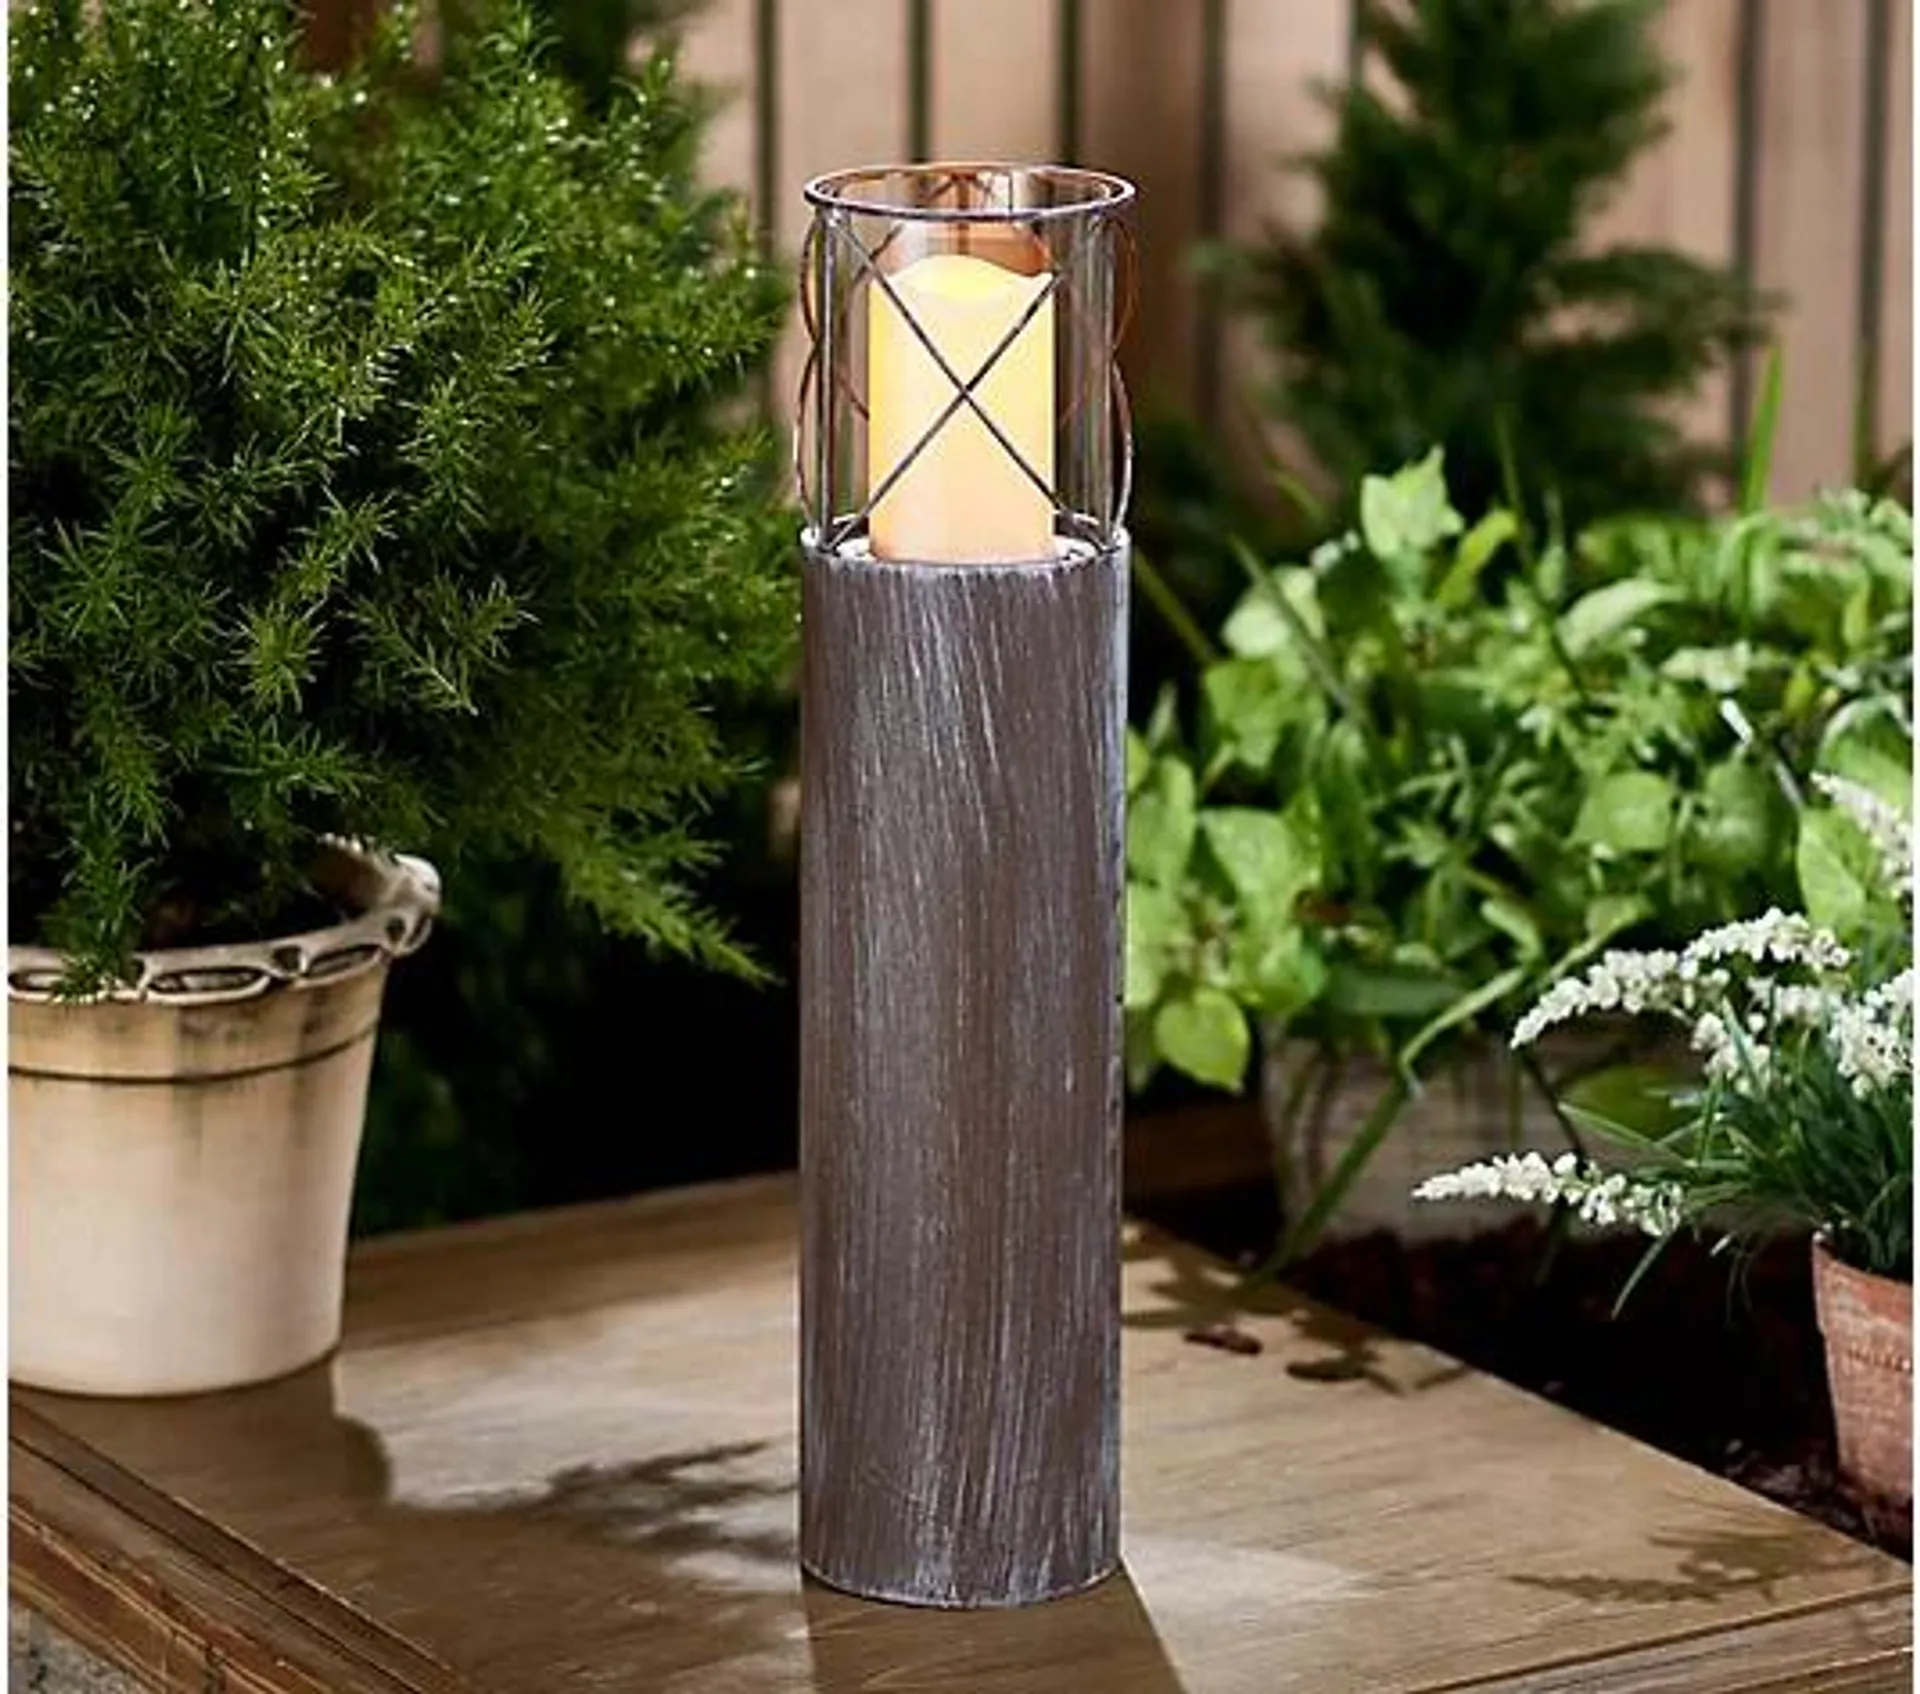 Garden Reflections 22" Tall Iron Candle Holder with LED Candle